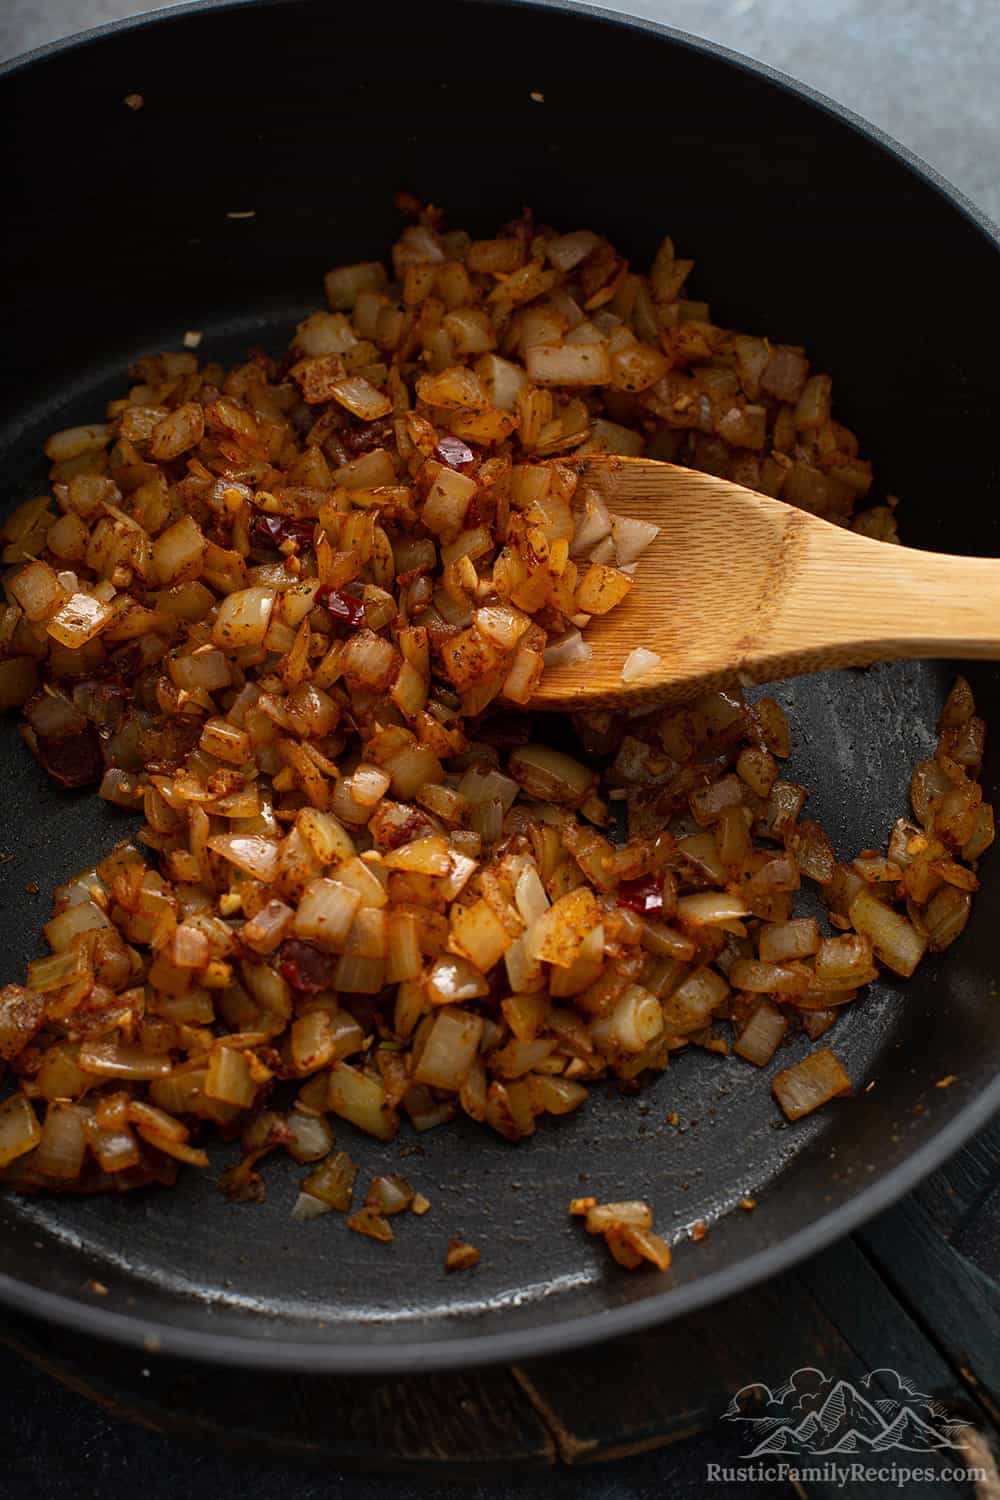 A pan with caramelized onions and a wooden spoon.